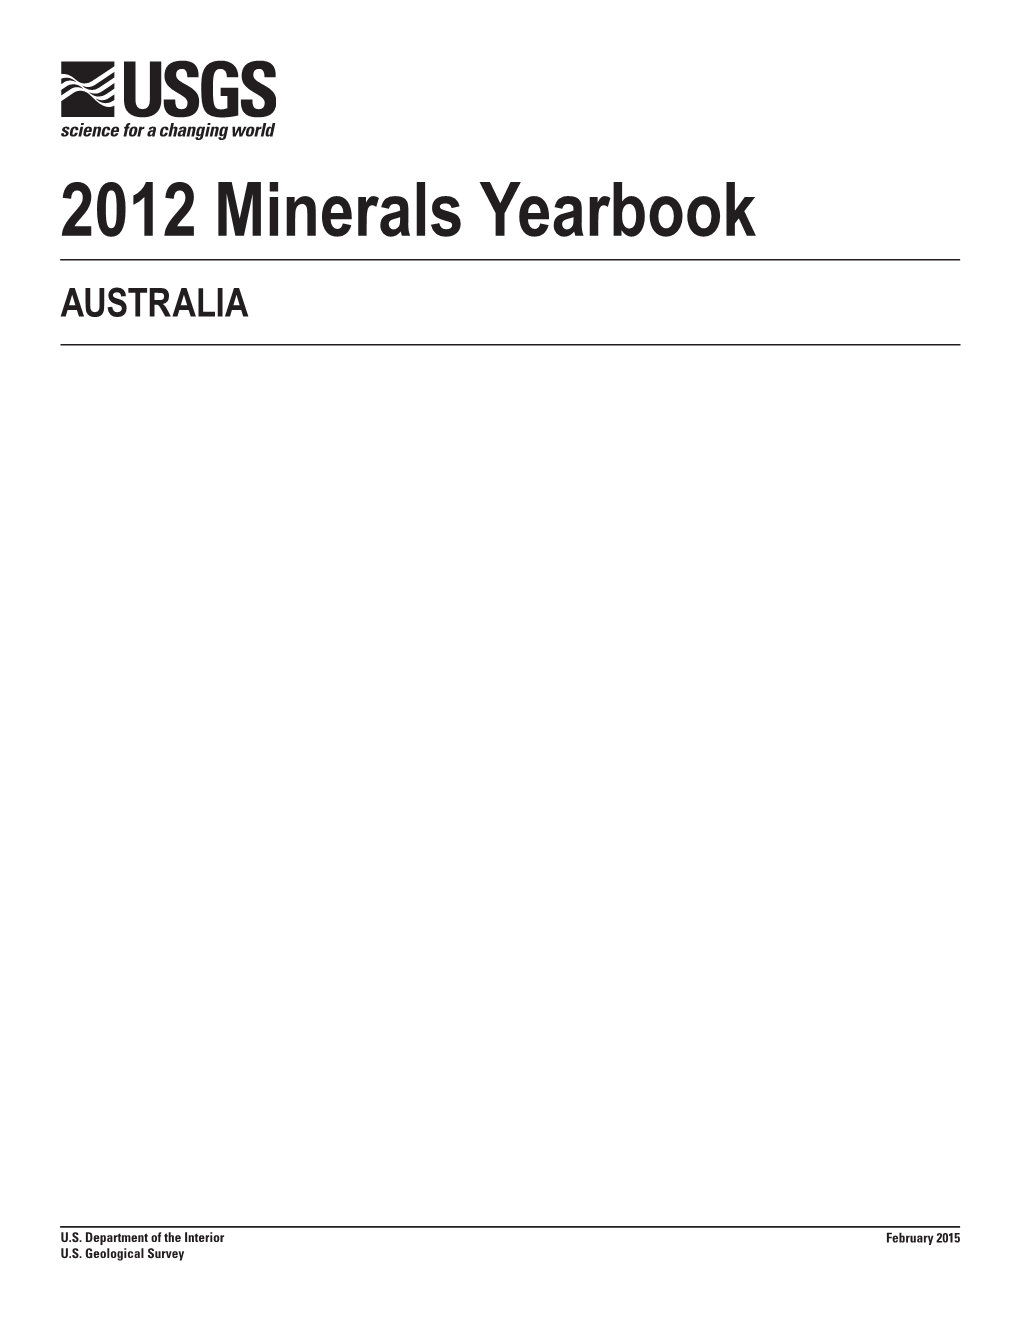 The Mineral Industry of Australia in 2012